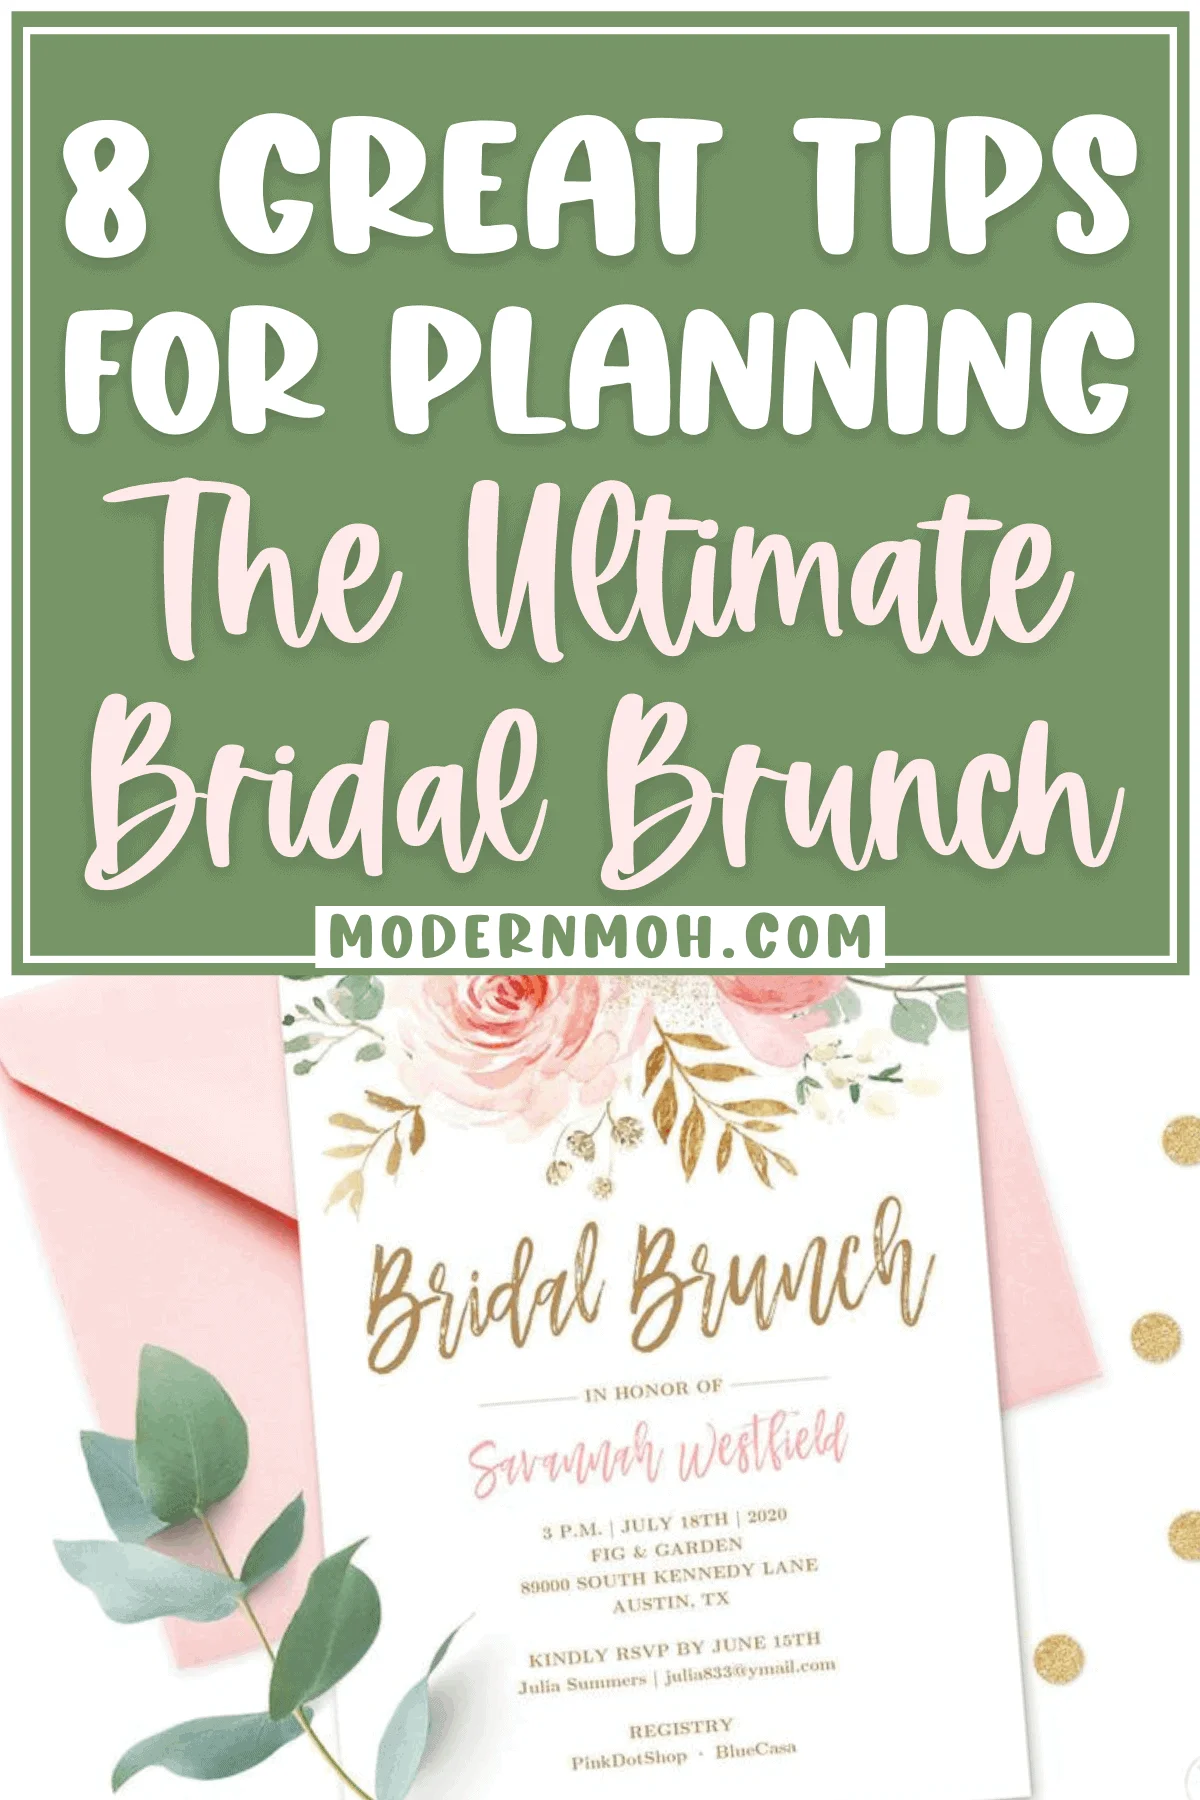 How to Host a Bridal Shower Brunch in 8 Simple Steps